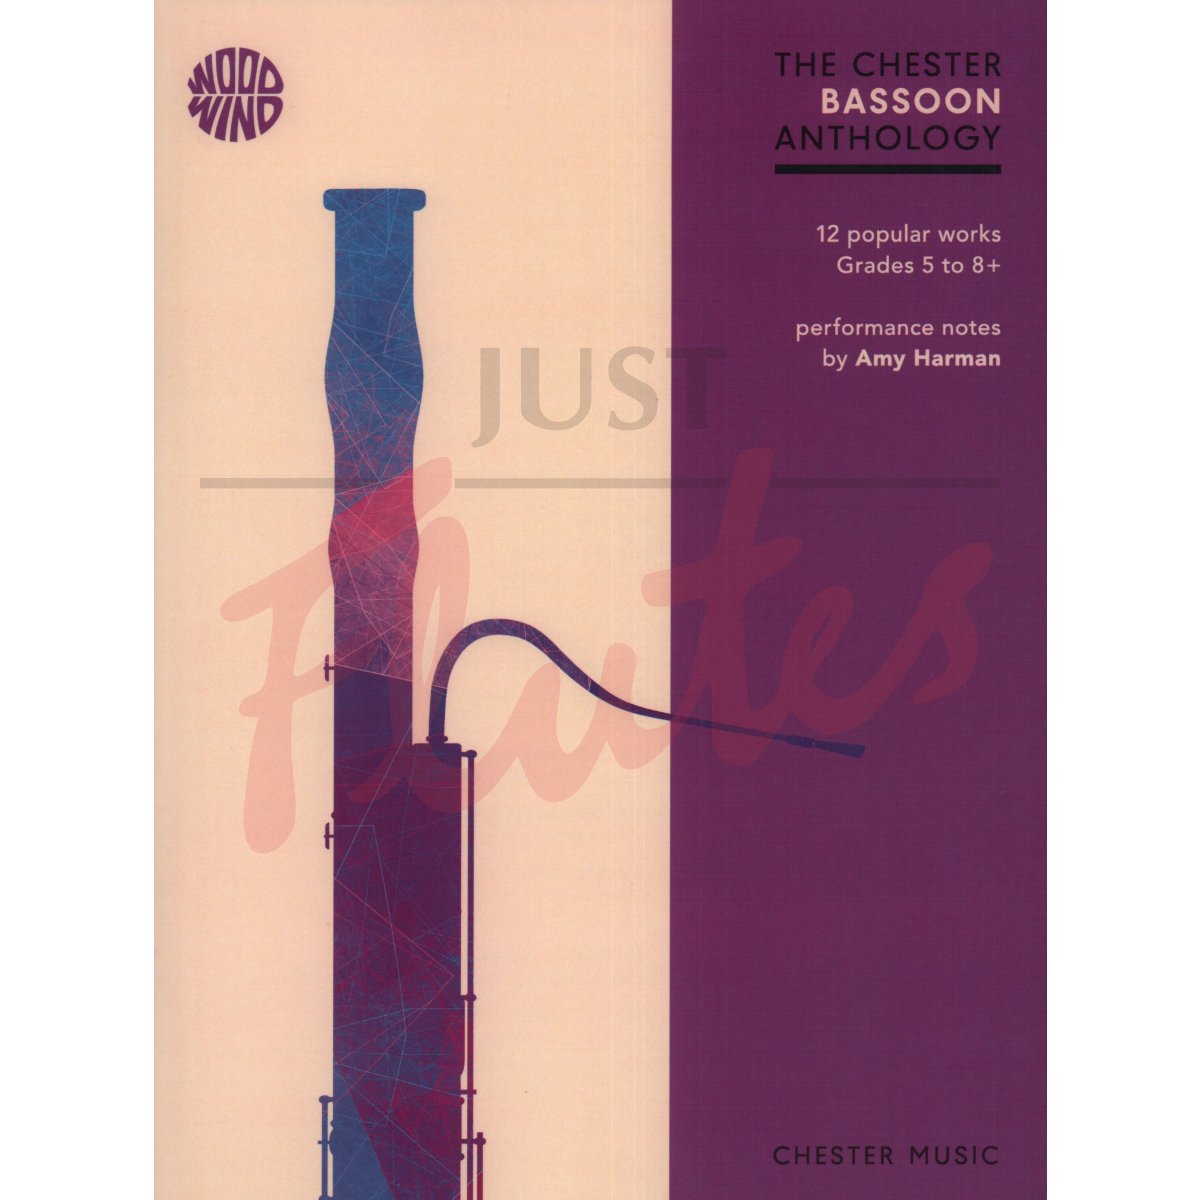 The Chester Bassoon Anthology